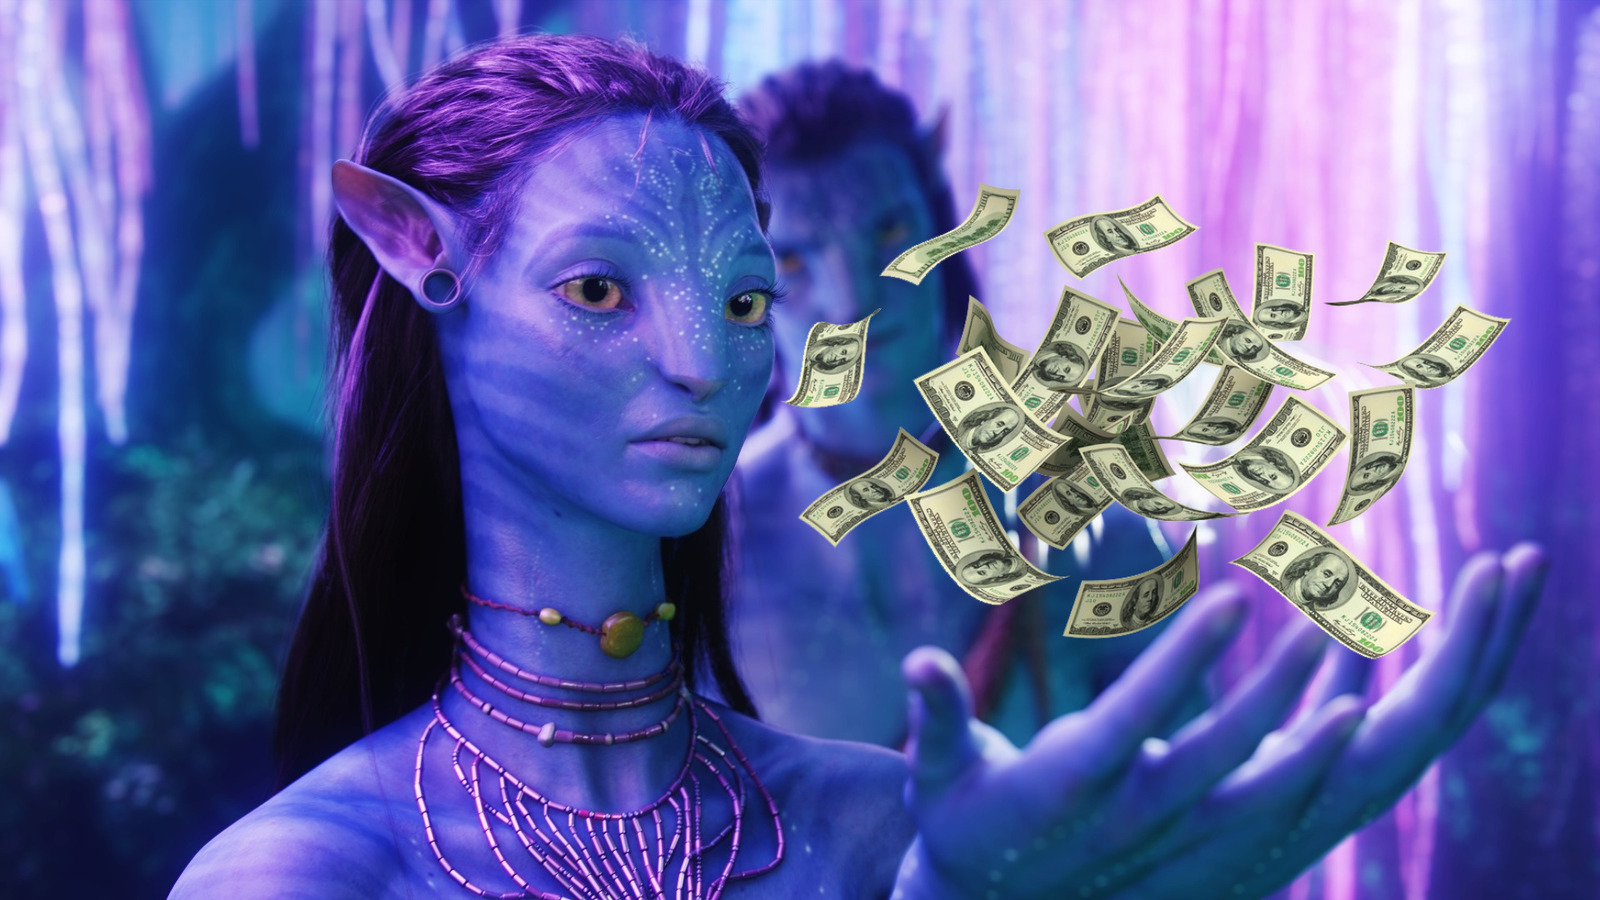 Avatar 2 Beats Top Gun 2 to Become No 1 Movie of 2022 at Global Box Office